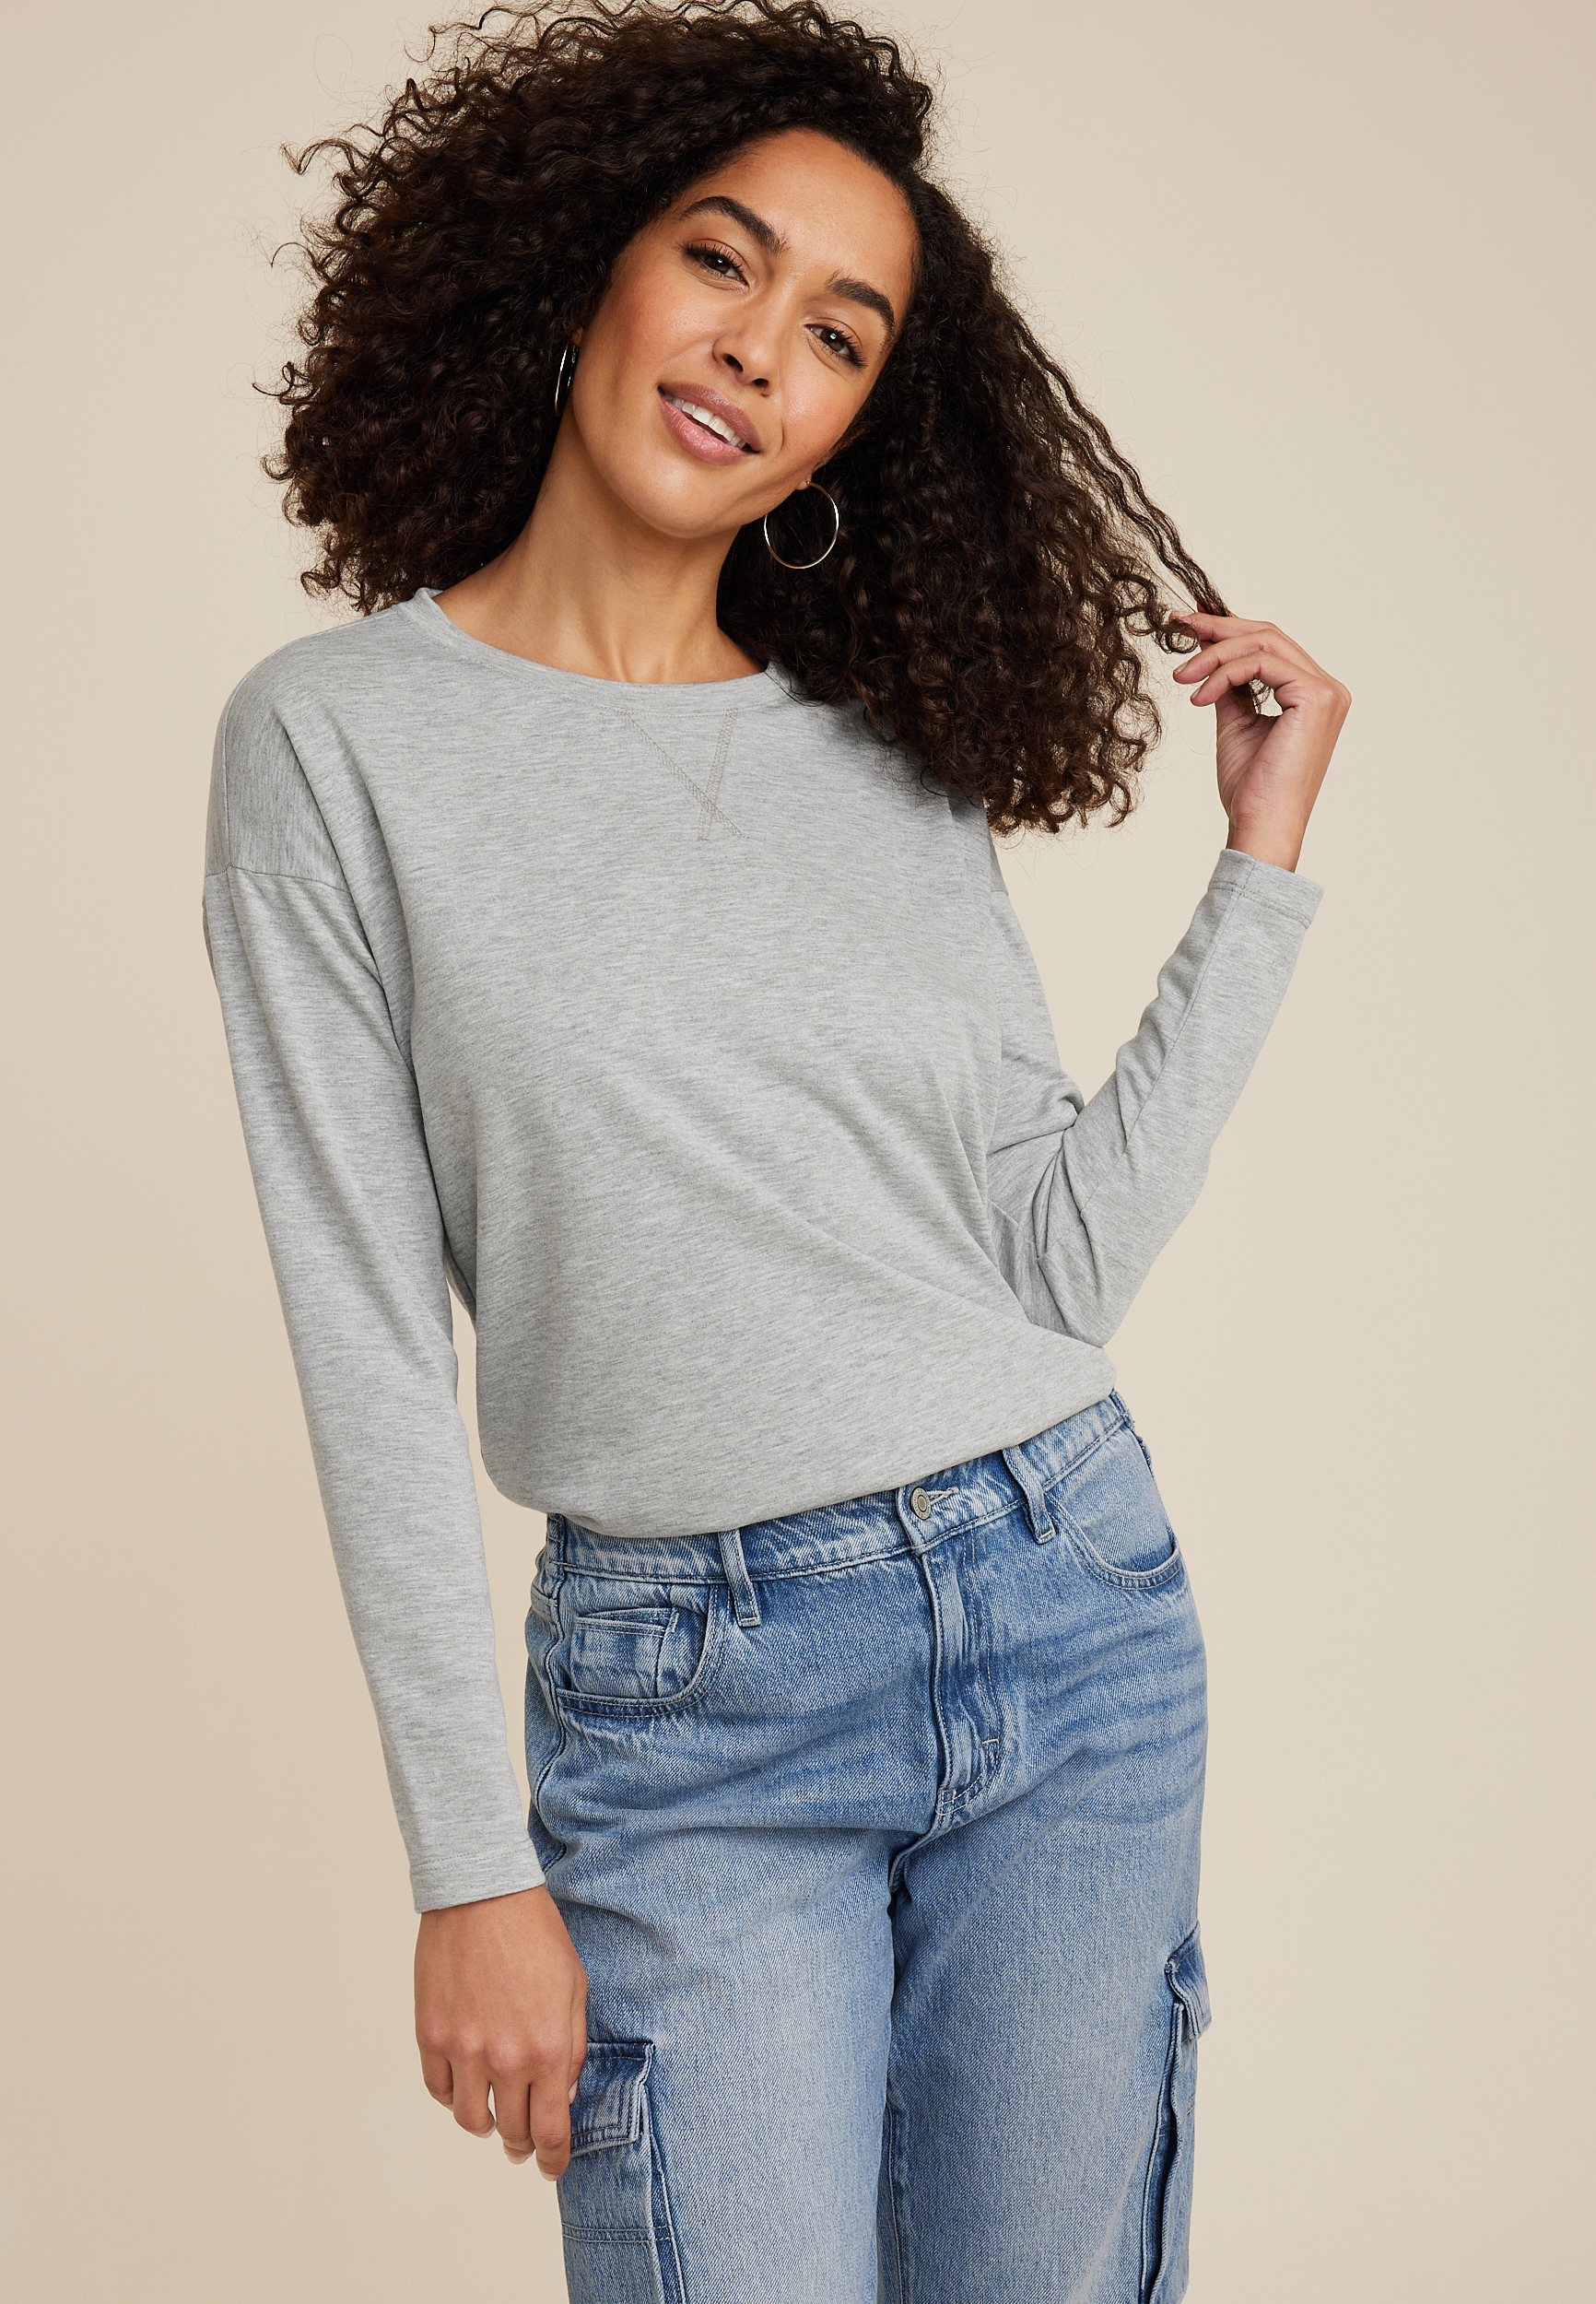 Women's Tops Clearance